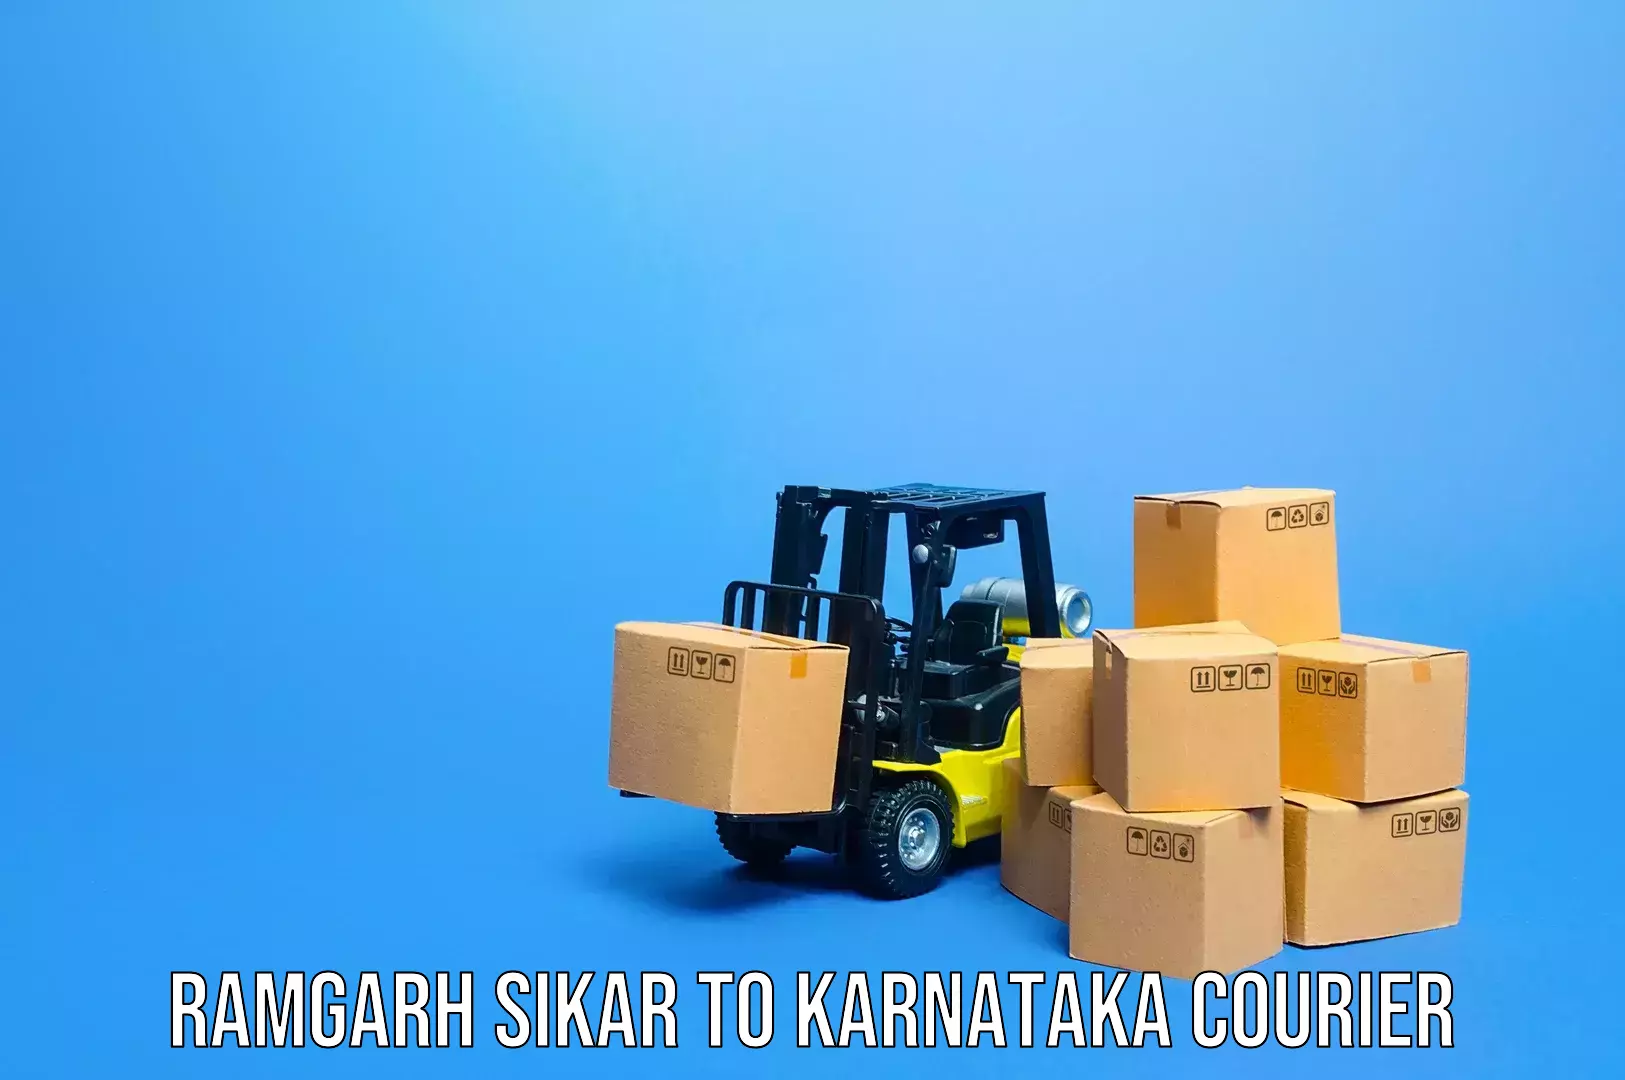 Luggage delivery calculator Ramgarh Sikar to Manipal